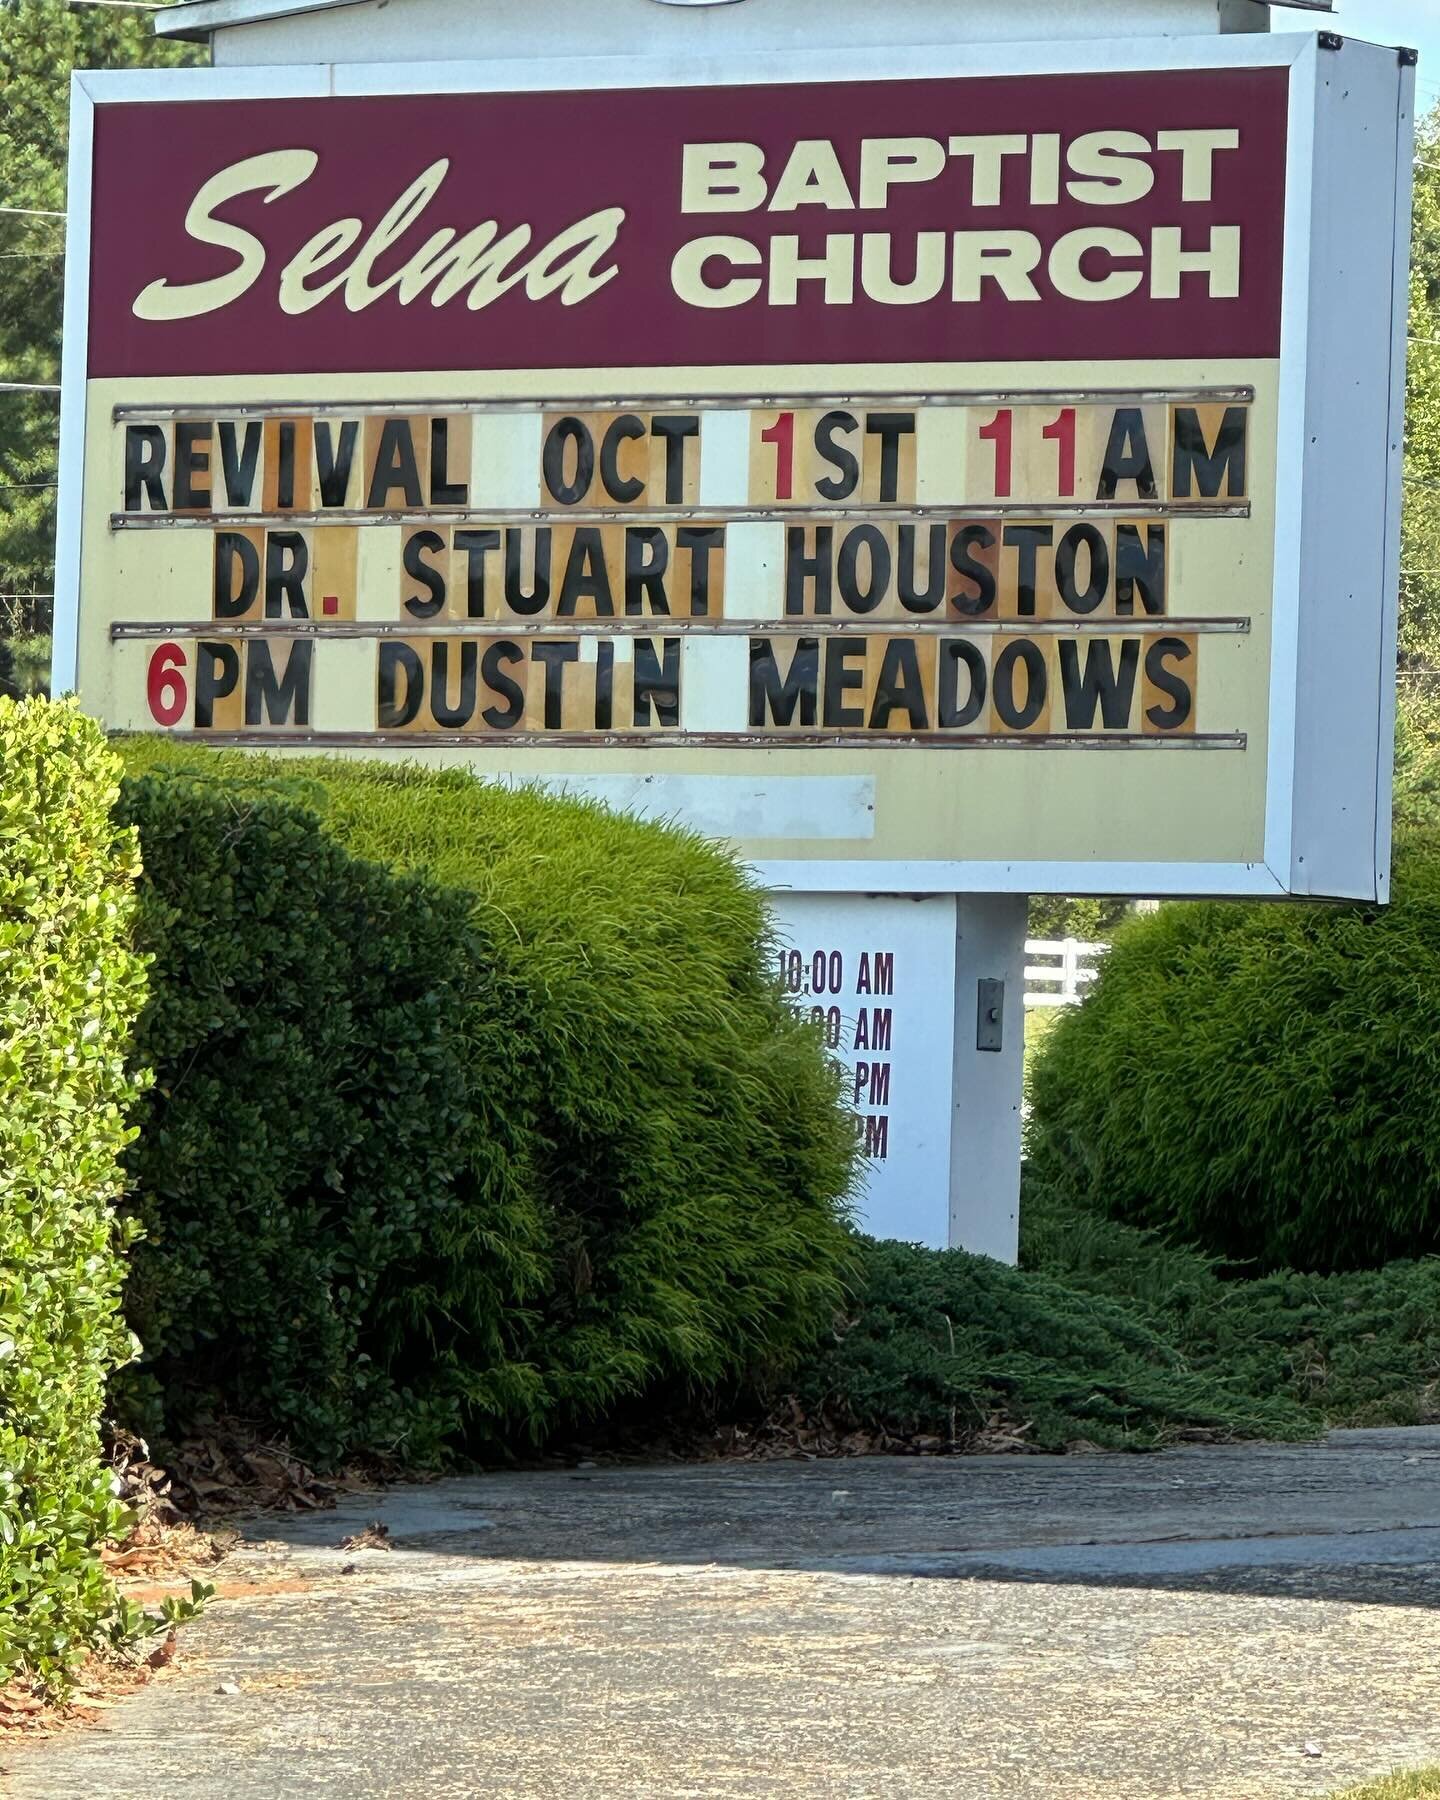 Had such a great time tonight leading worship at Selma Baptist Church. They were very gracious hosts, and it was a sweet service. Next stop, Windy Gap (October 4-7)